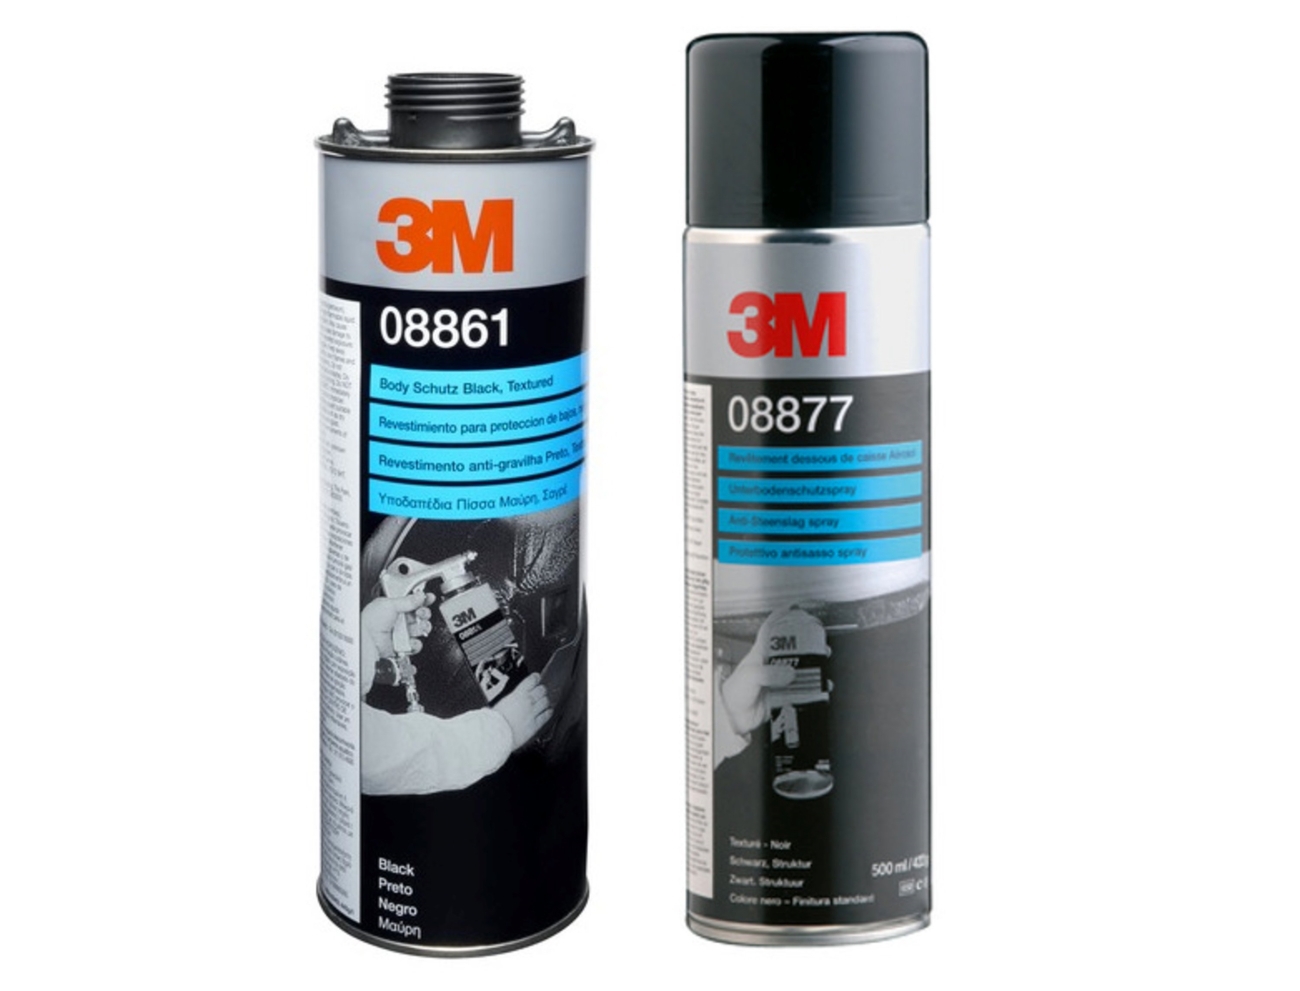 3M Body protection coating underbody protection, not paintable, black, 1 l, 08861